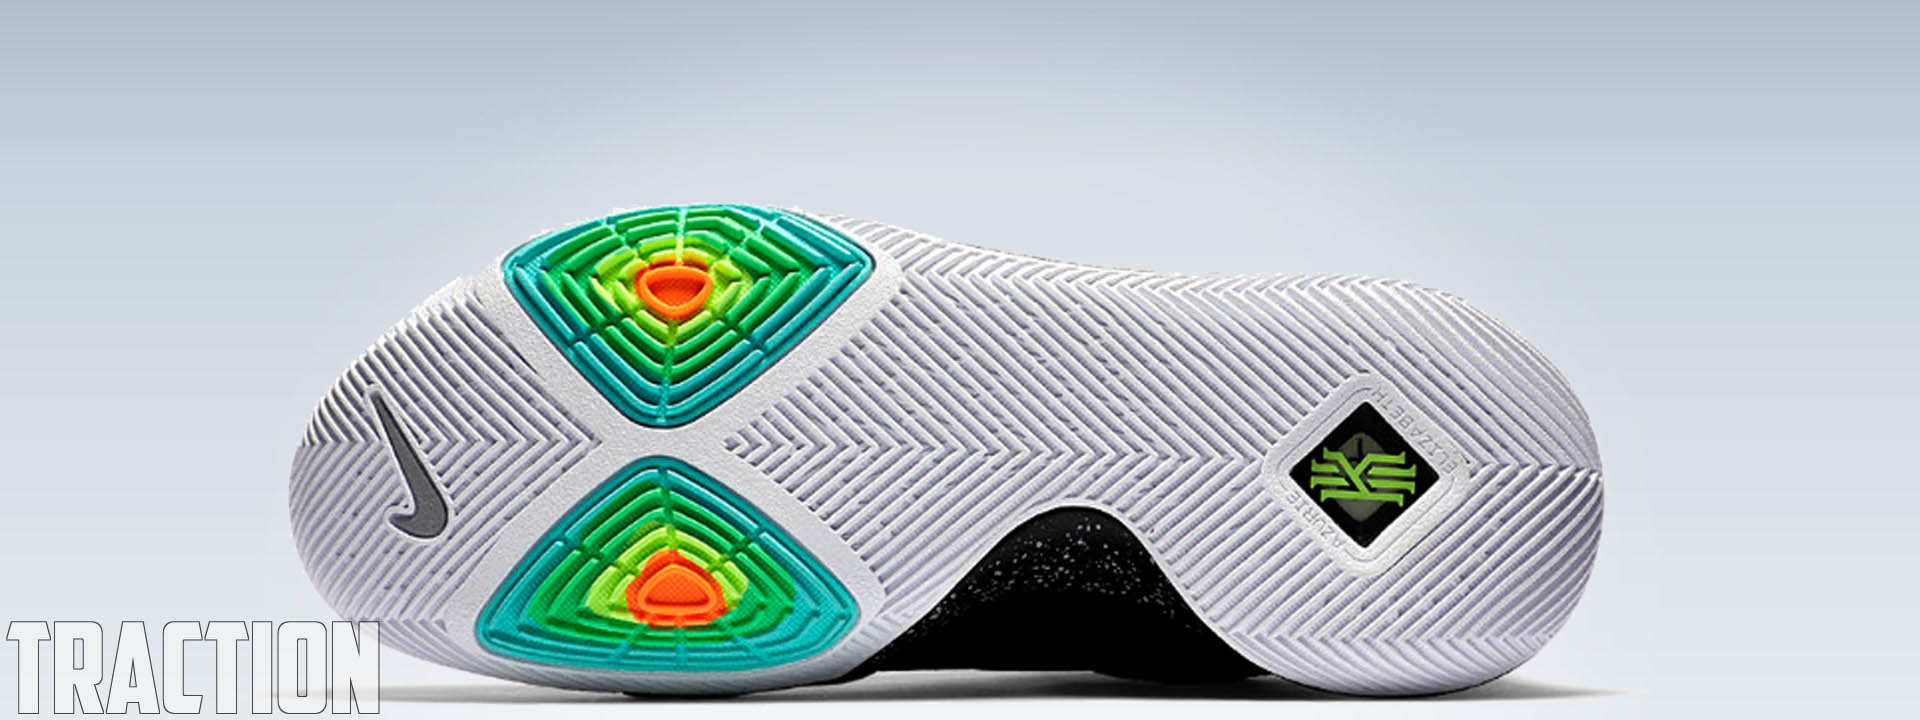 Nike Kyrie 3 Performance Review 